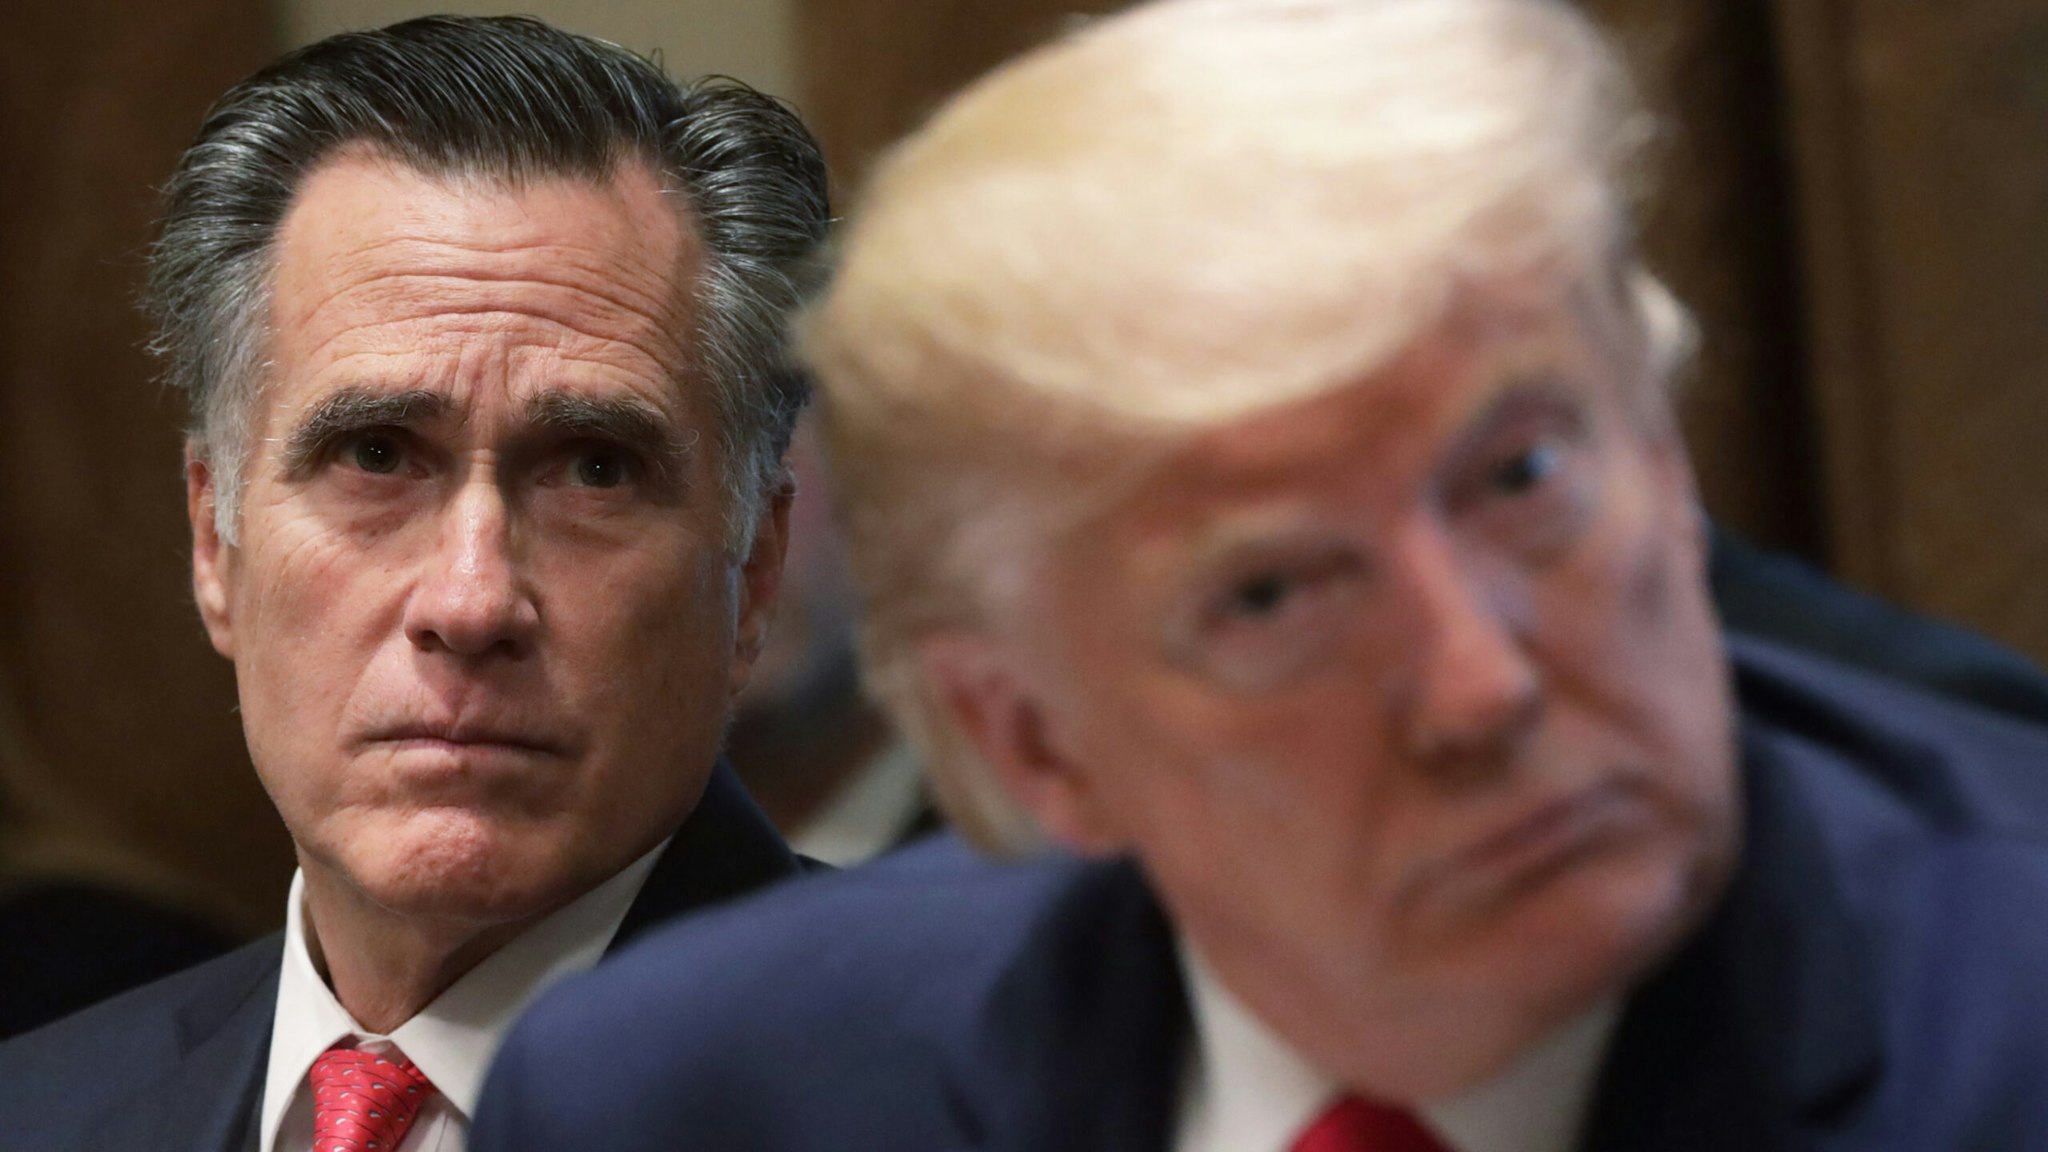 U.S. Sen. Mitt Romney (R-UT) and President Donald Trump listen during a listening session on youth vaping of electronic cigarette on November 22, 2019 in the Cabinet Room of the White House in Washington, DC.